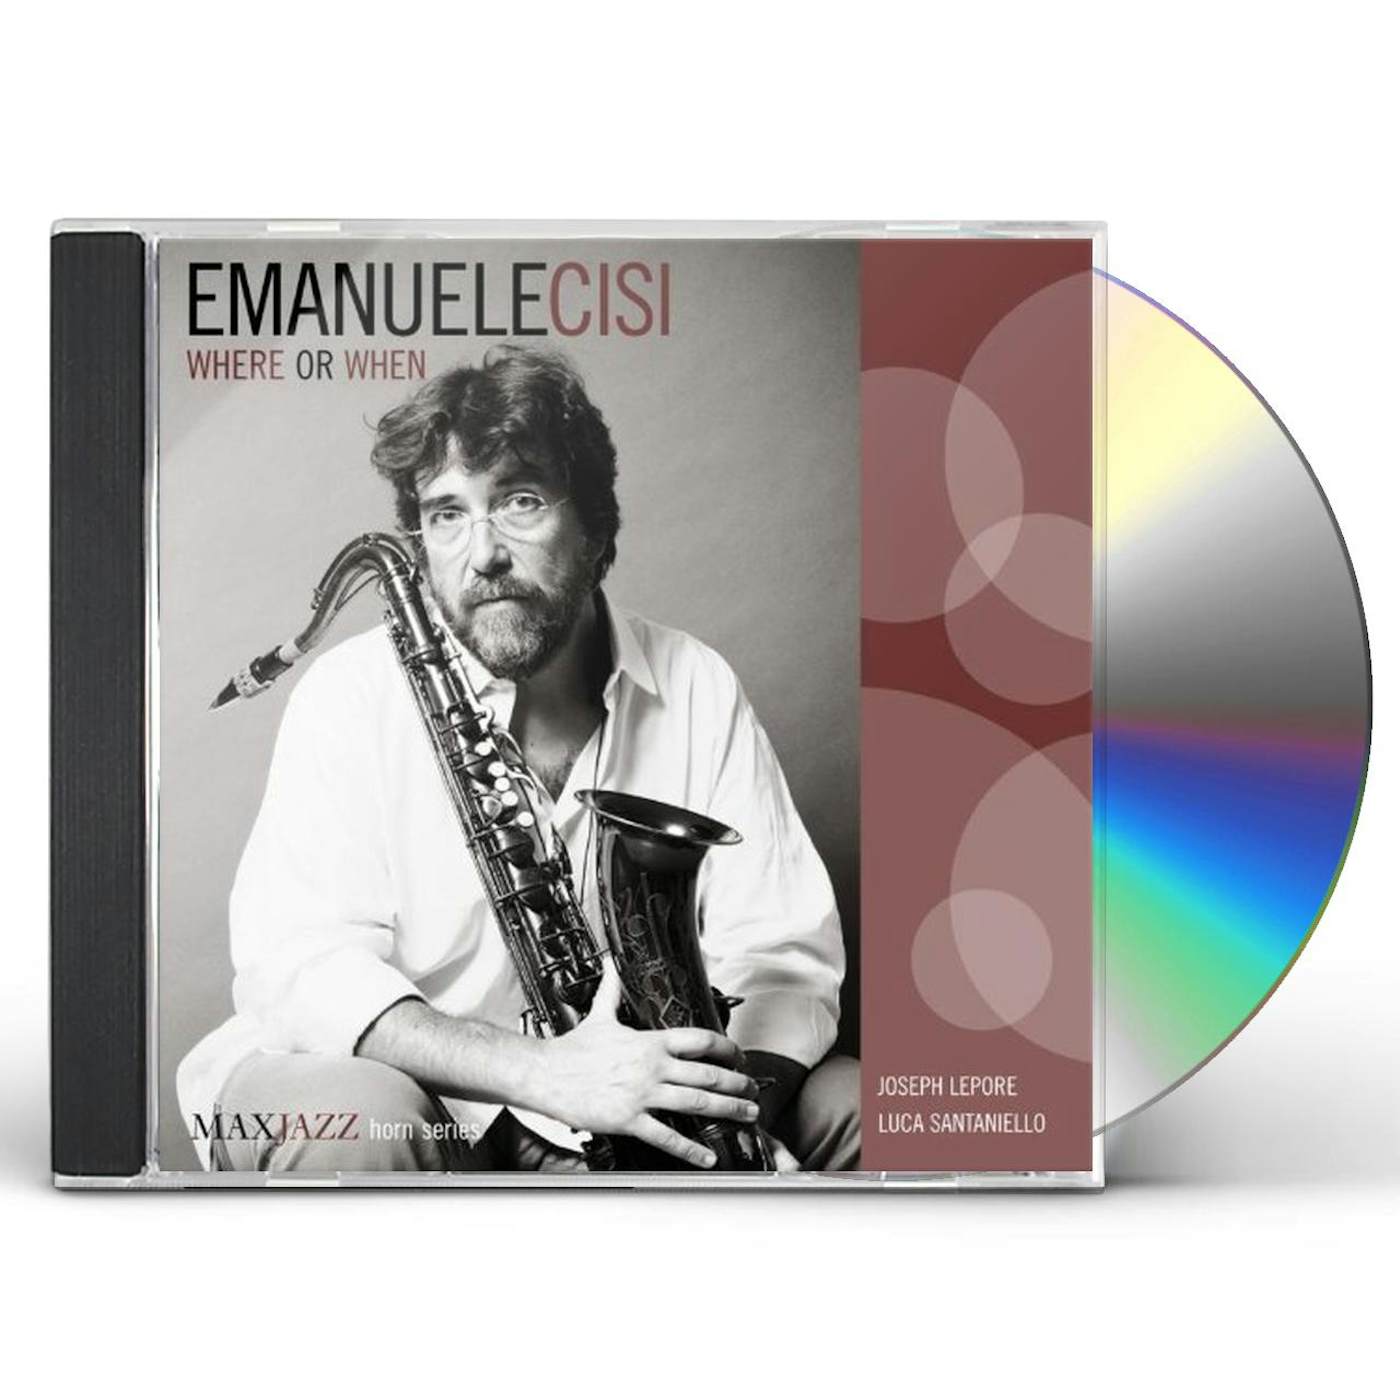 Emanuele Cisi WHERE OR WHEN CD